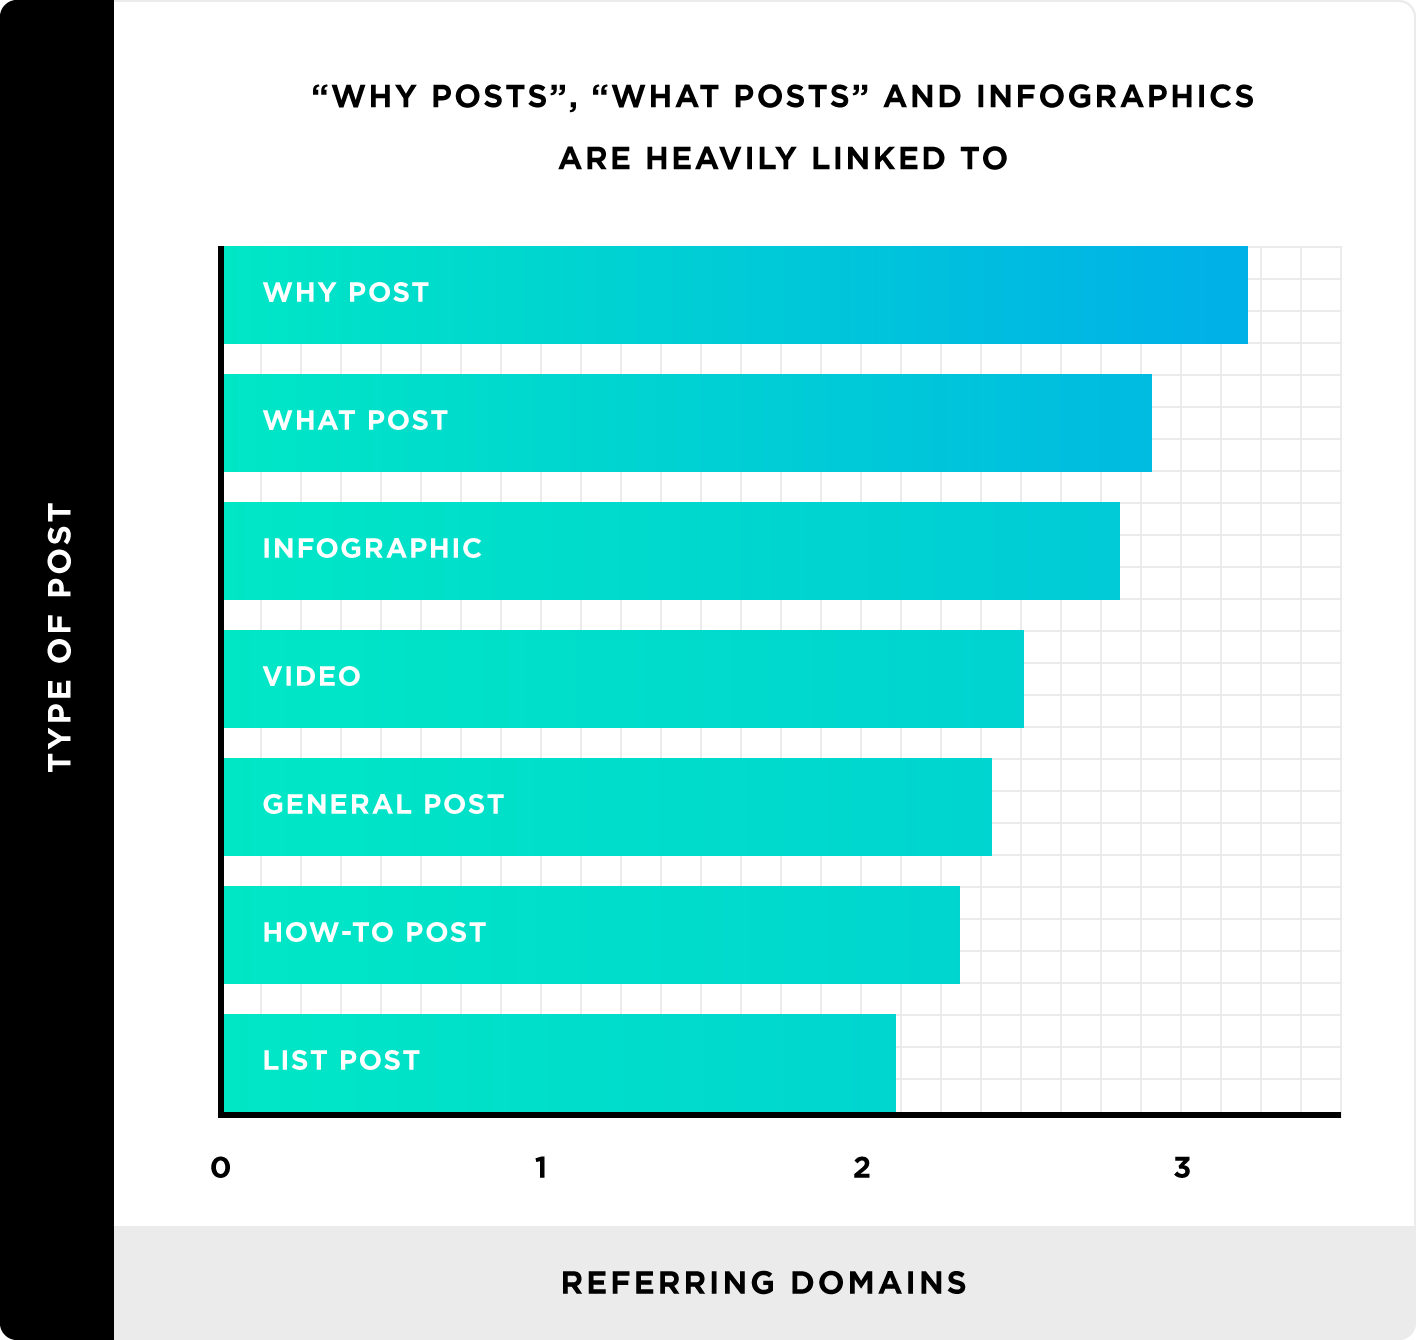 "Why posts", "What posts" and infographics are heavily linked to